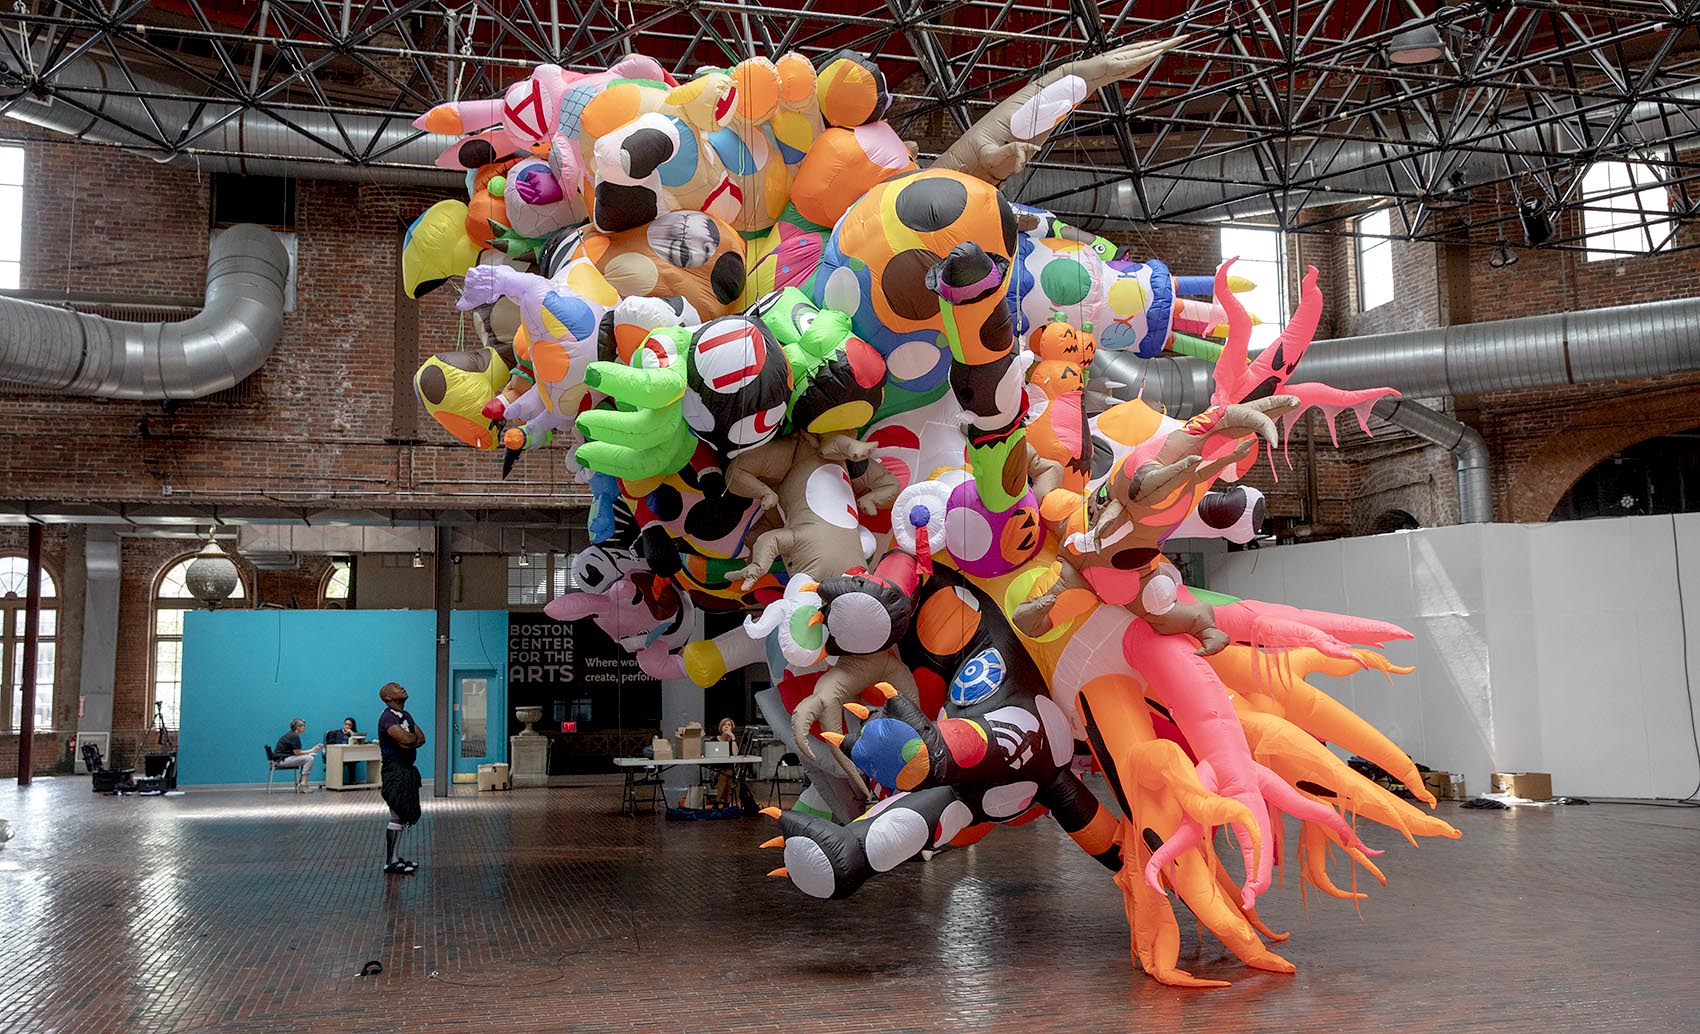 Artist Nick Cave's inflatable sculpture for his &quot;Augment&quot; project in Boston is on display at the Boston Center for The Arts (Robin Lubbock/WBUR)